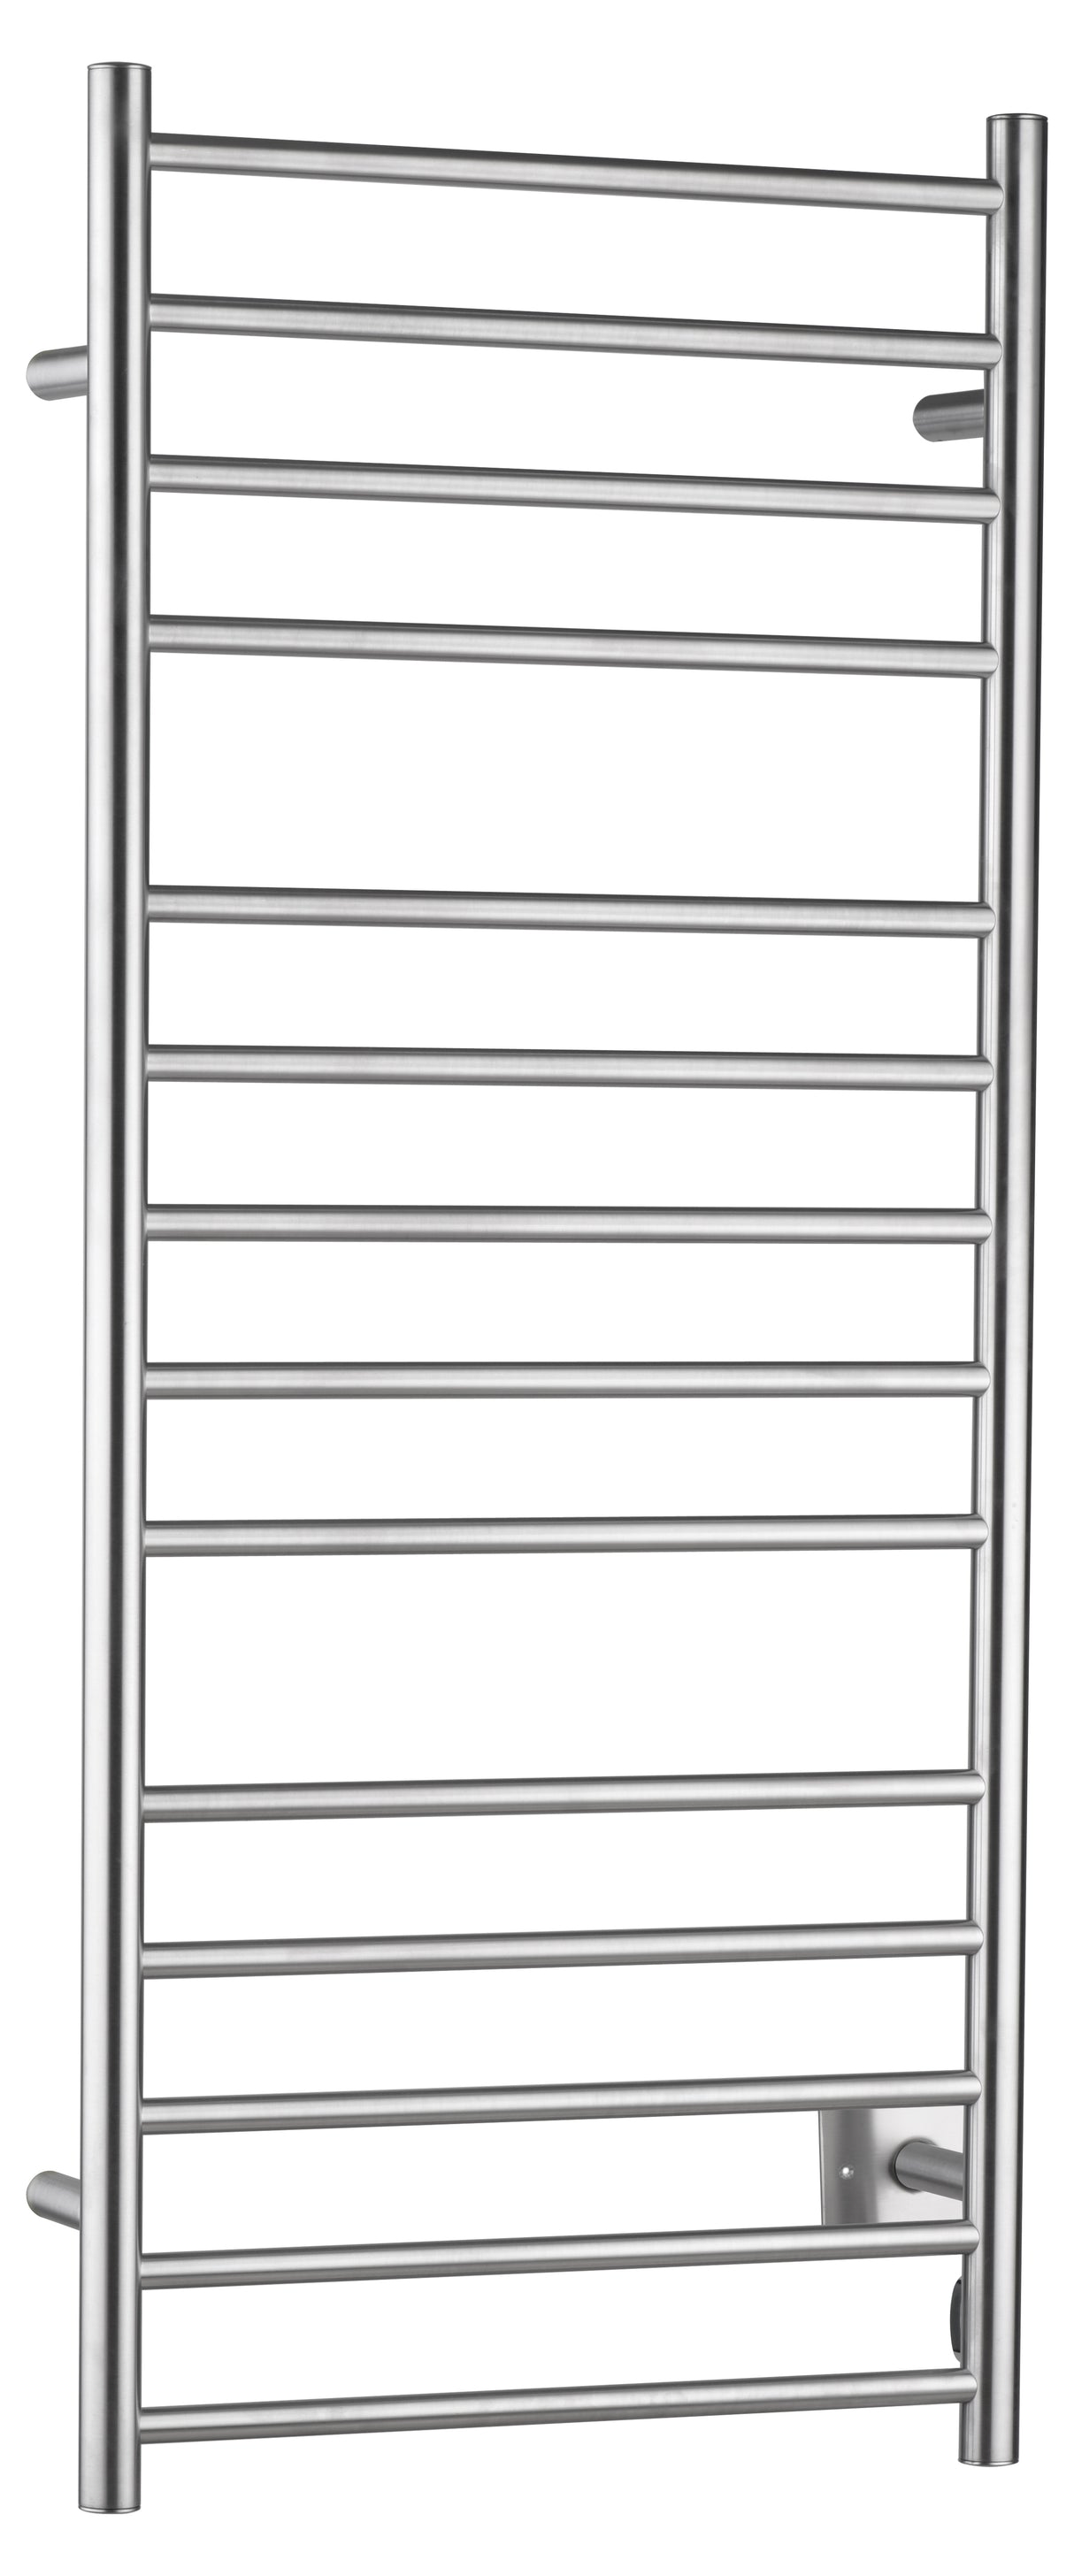 ANZZI TW-WM105BN Elgon 14-Bar Stainless Steel Wall Mounted Towel Warmer Rack with Brushed Nickel Finish